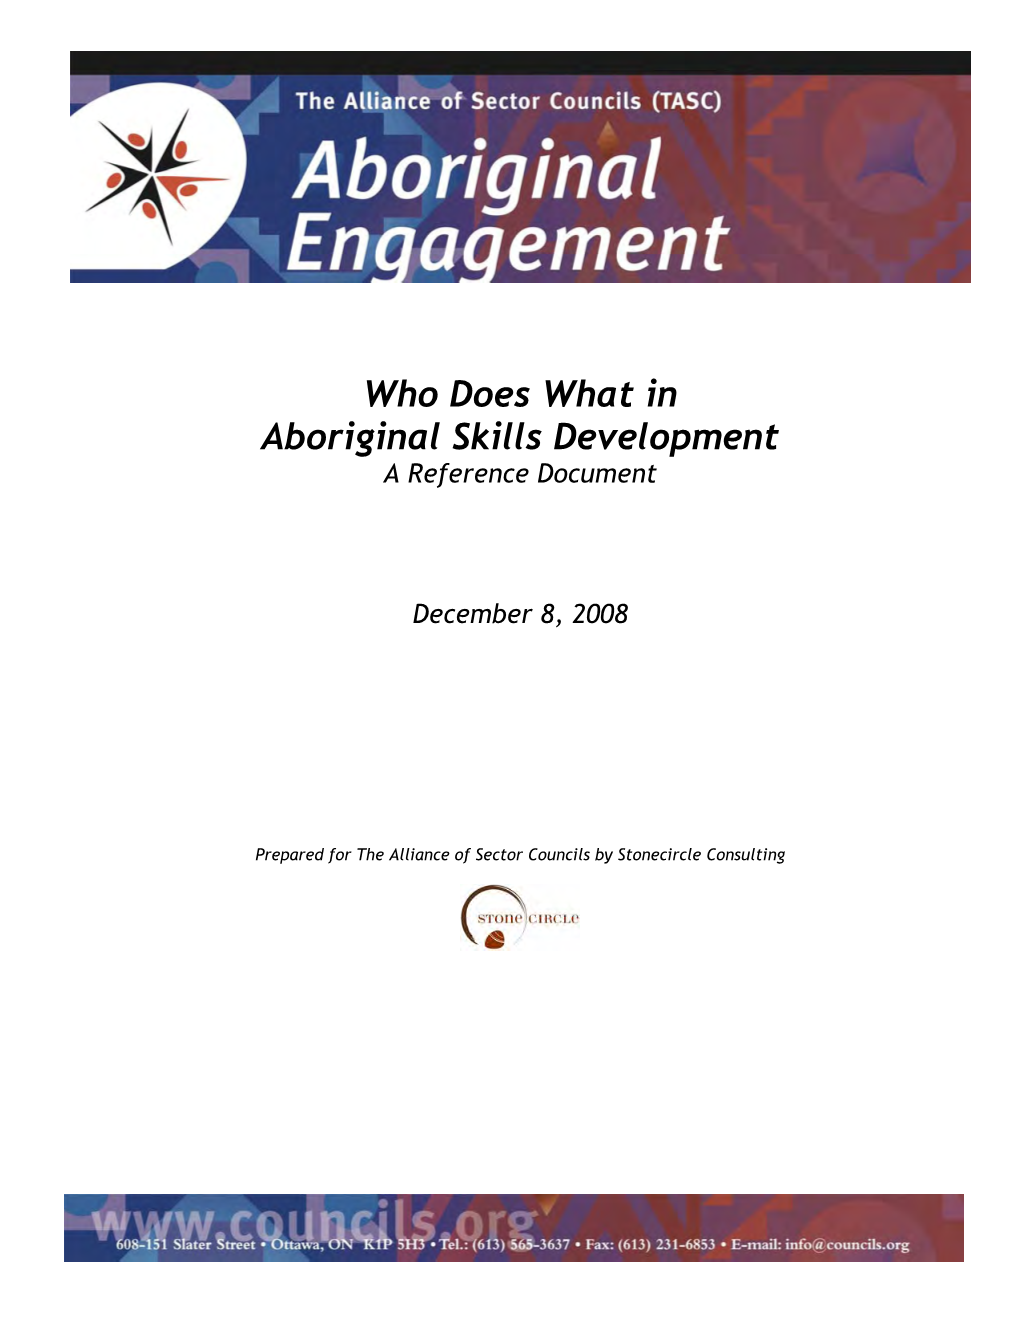 Aboriginal Engagement, Co‐Chaired by Kelly Lendsay of the Aboriginal Human Resource Council and Richard Lipman of the Wood Manufacturing Council